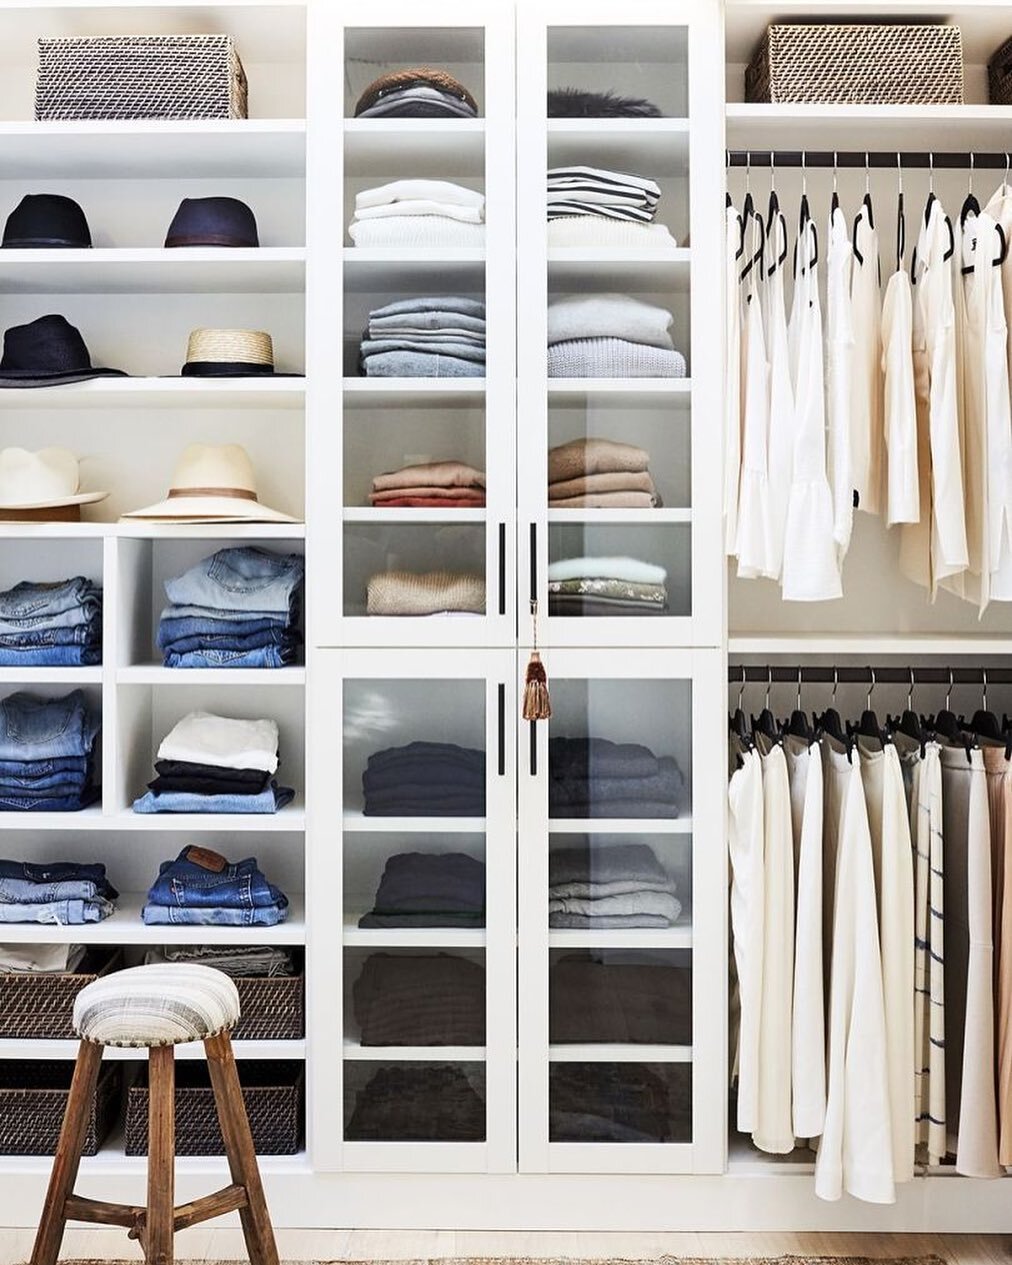 Its amazing when your closet is fully organized - getting ready in the morning is a breeze, and you can actually see what you own! ✨ 🌿

The process of working with us is meant to put you at ease, without worry of being judged.  As Pro Organizers, yo